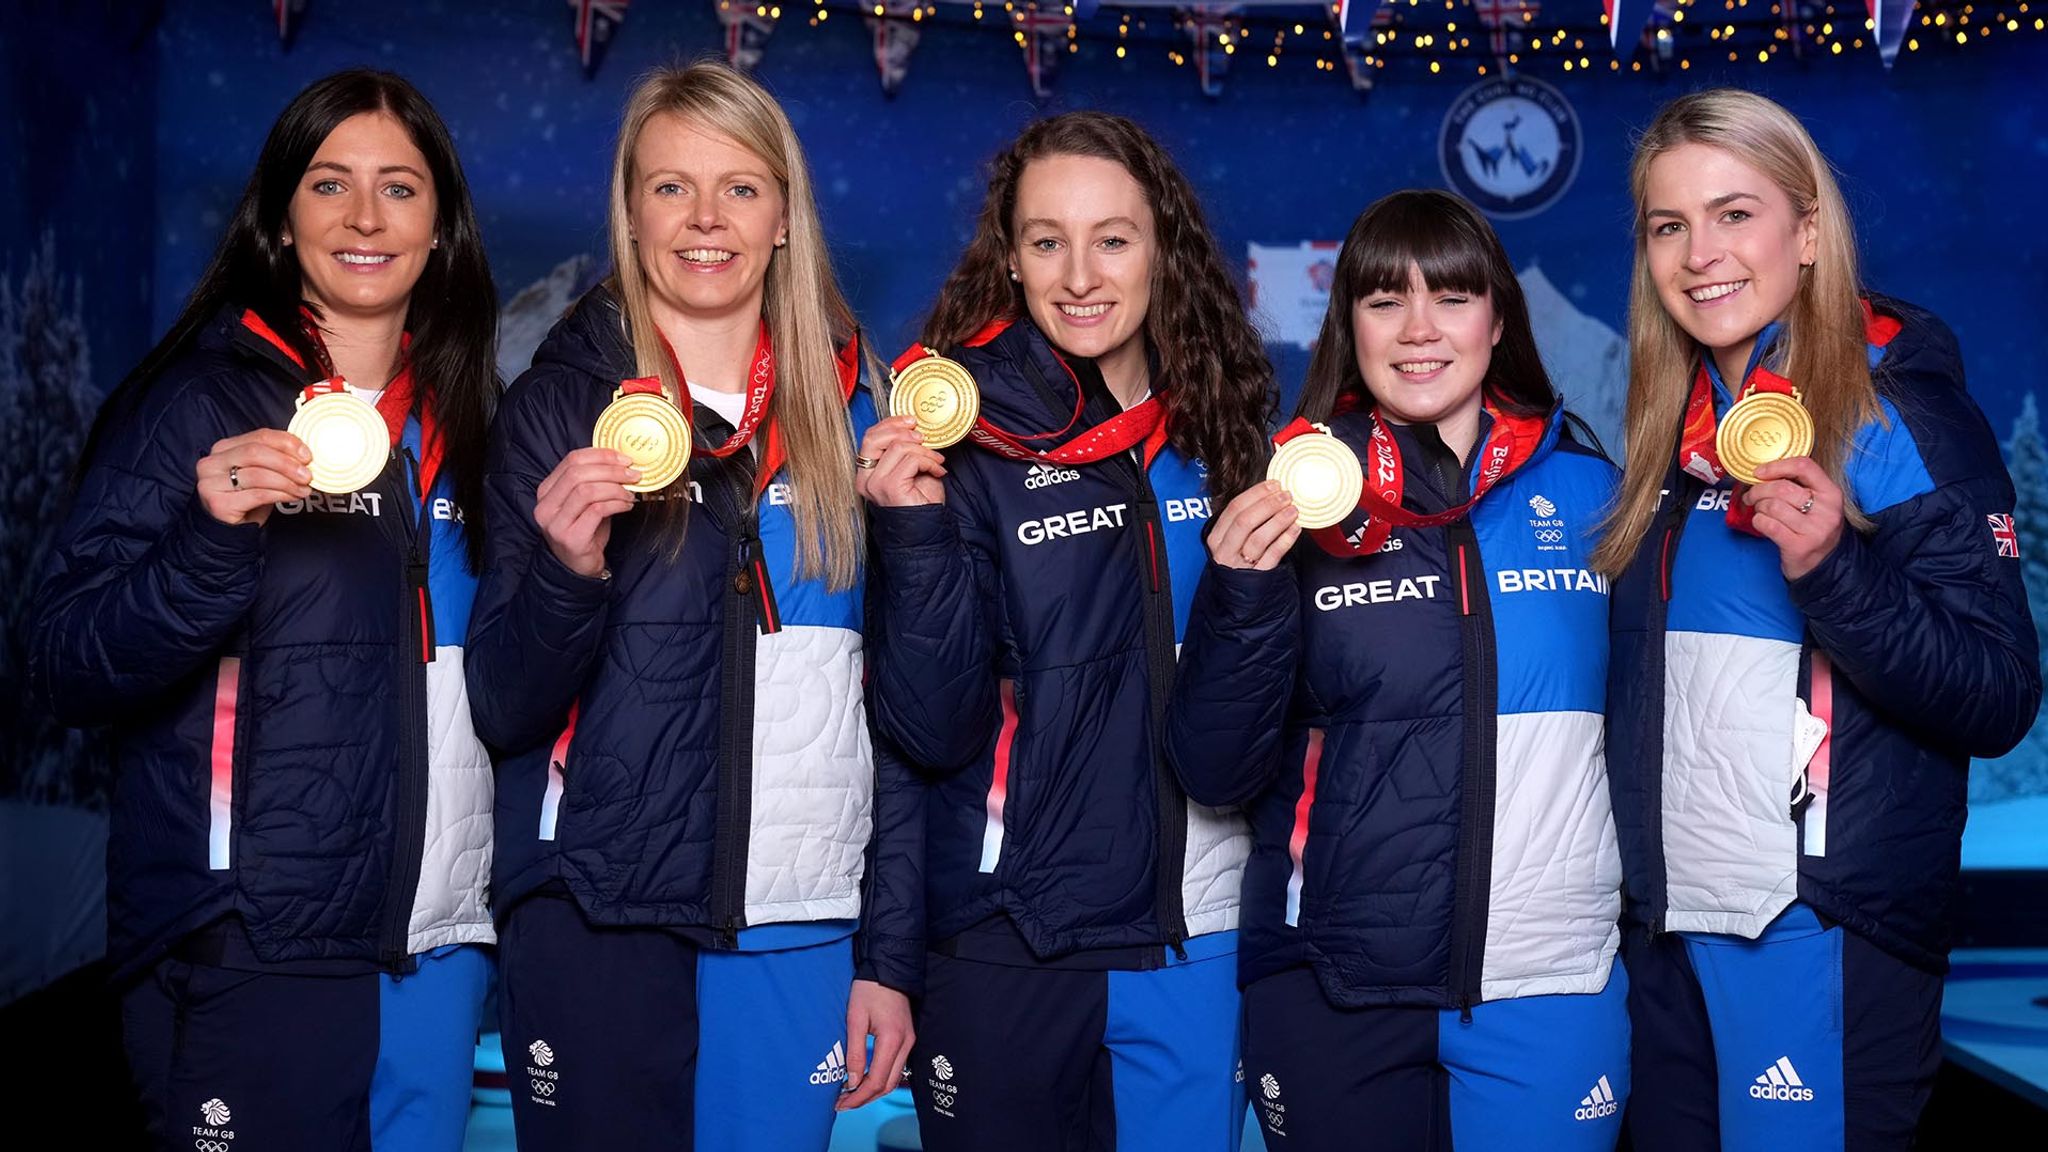 Beijing Winter Olympics: Team GB's women's curling team arrive home after  winning gold medals at the games, UK News